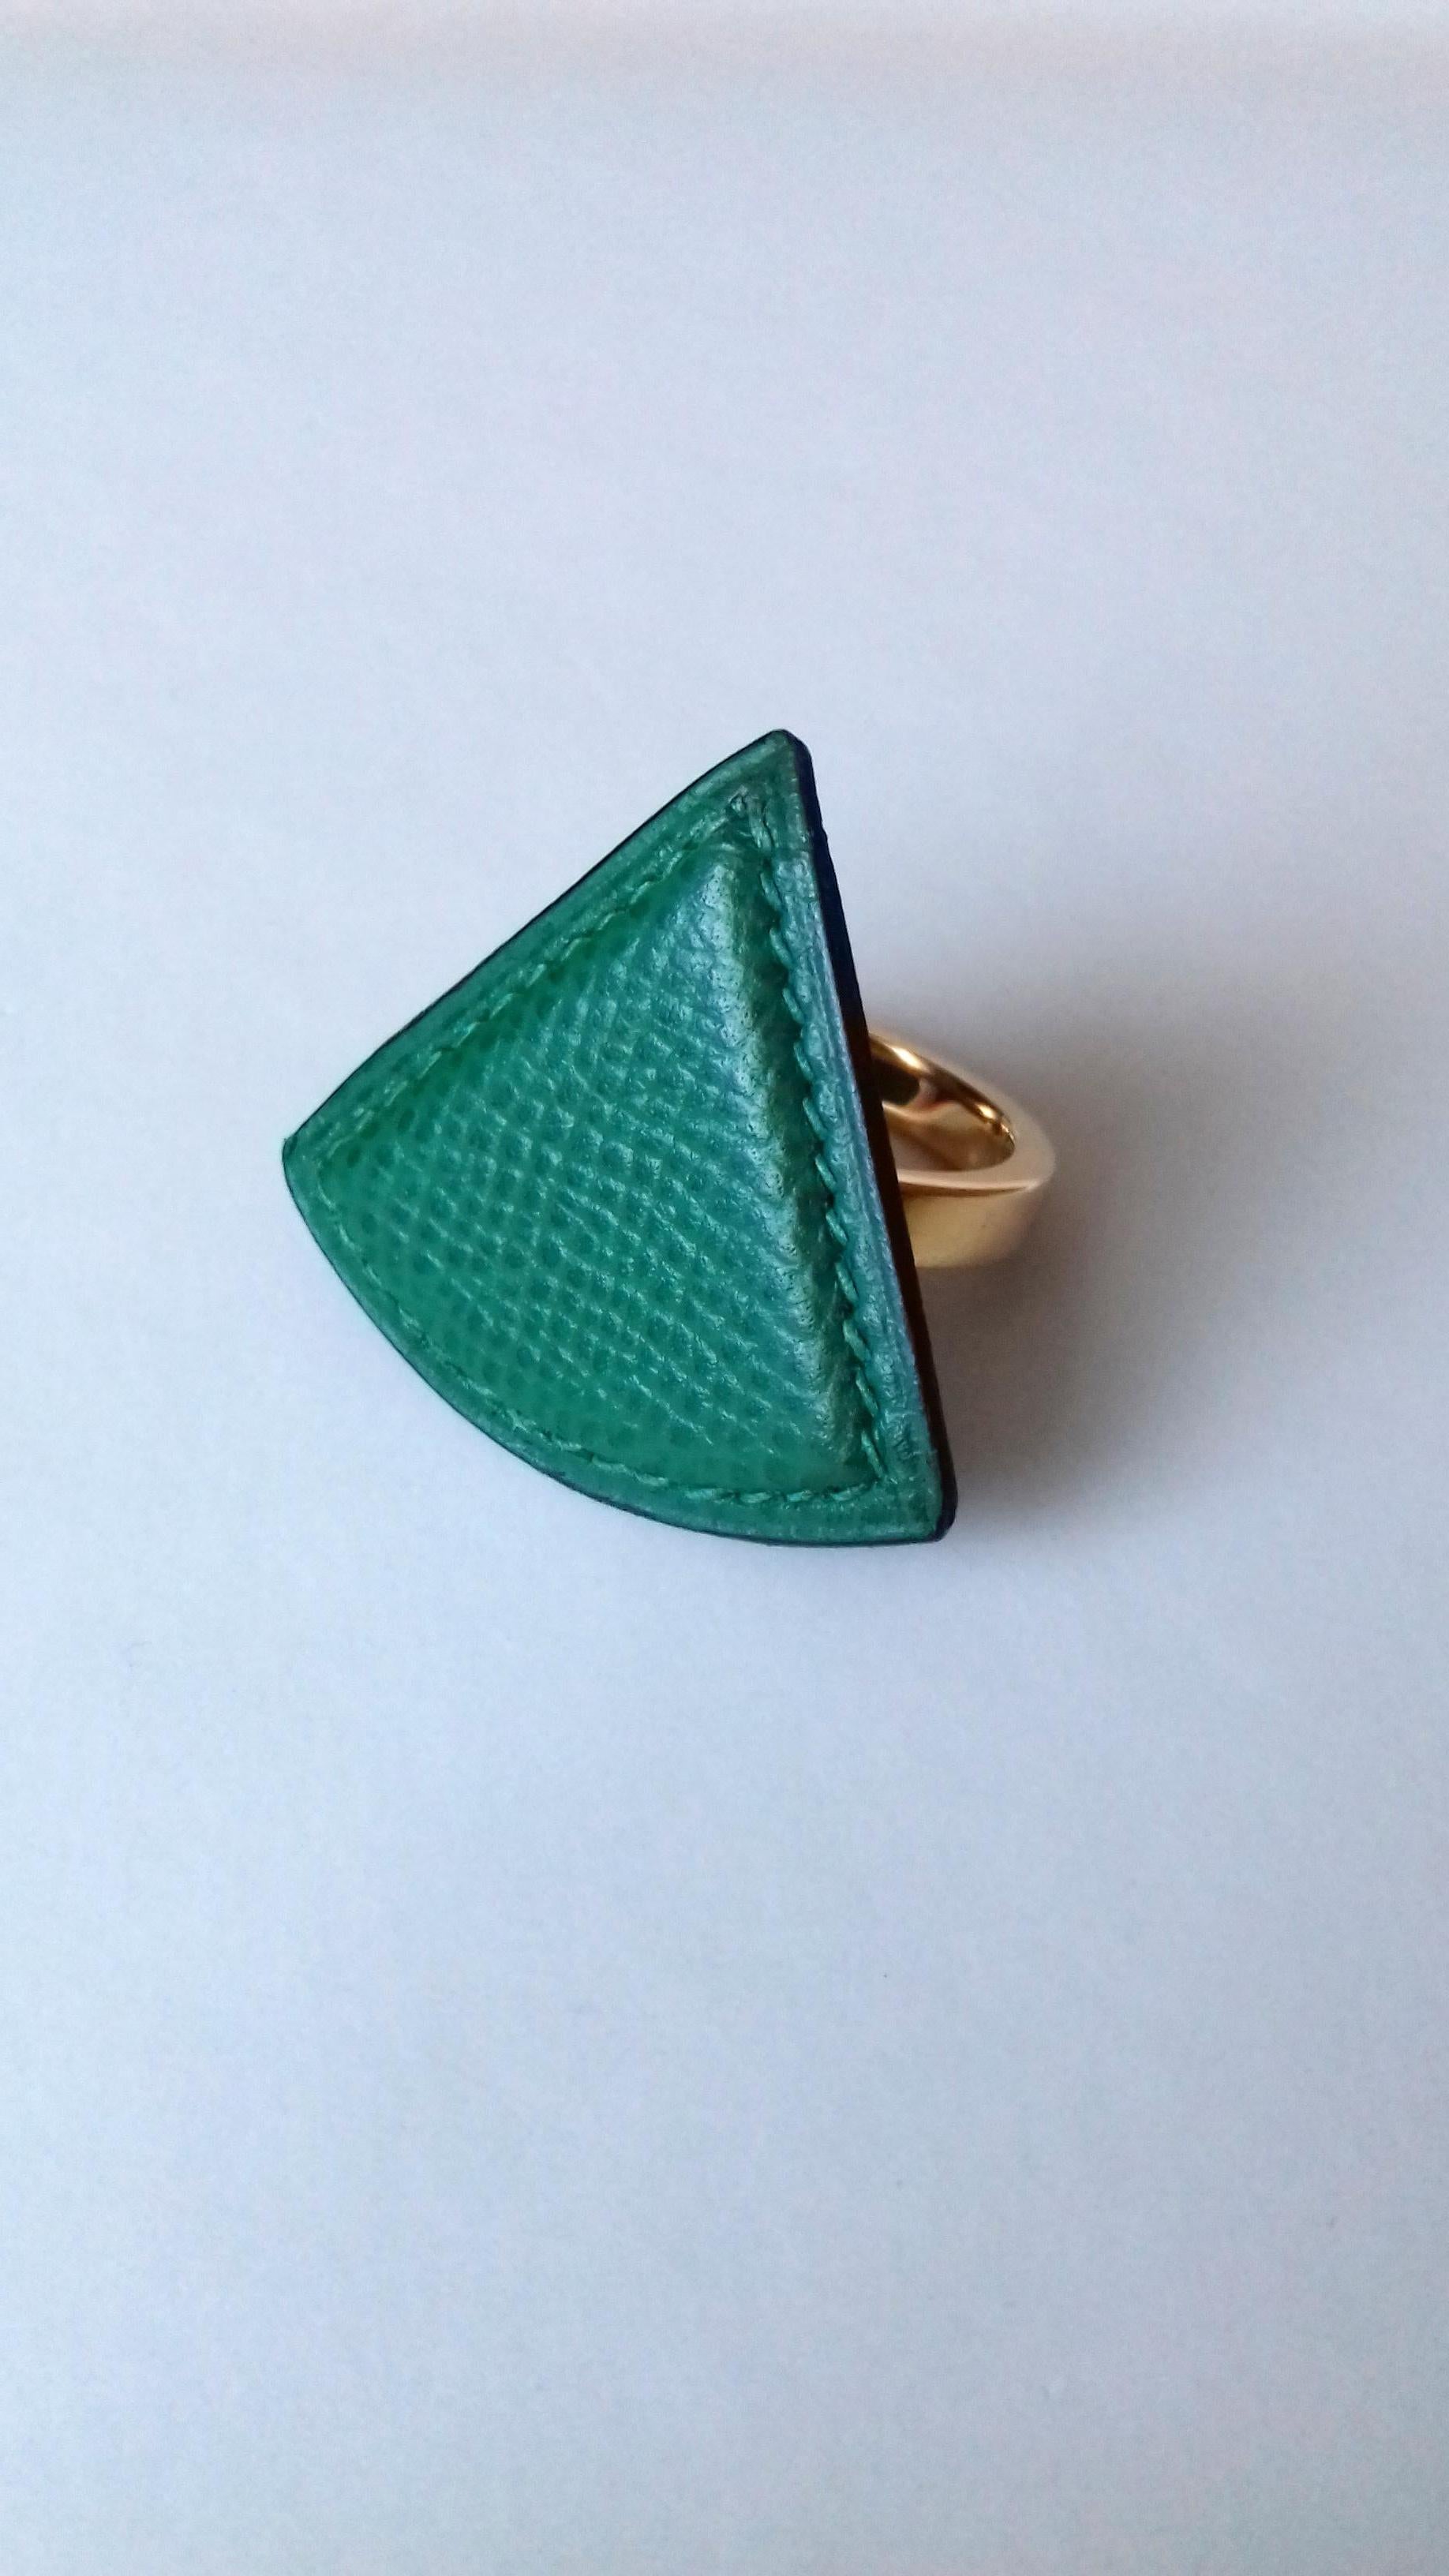 Rare and Beautiful Authentic Hermès Ring for Scarf

Pattern: Triangle

Made in France

Made of Courchevel Leather (Epsom) and Golden Hardware

Colorway: Green Leather, Green Sewings

Can be used as jewel ring, but please pay attention to